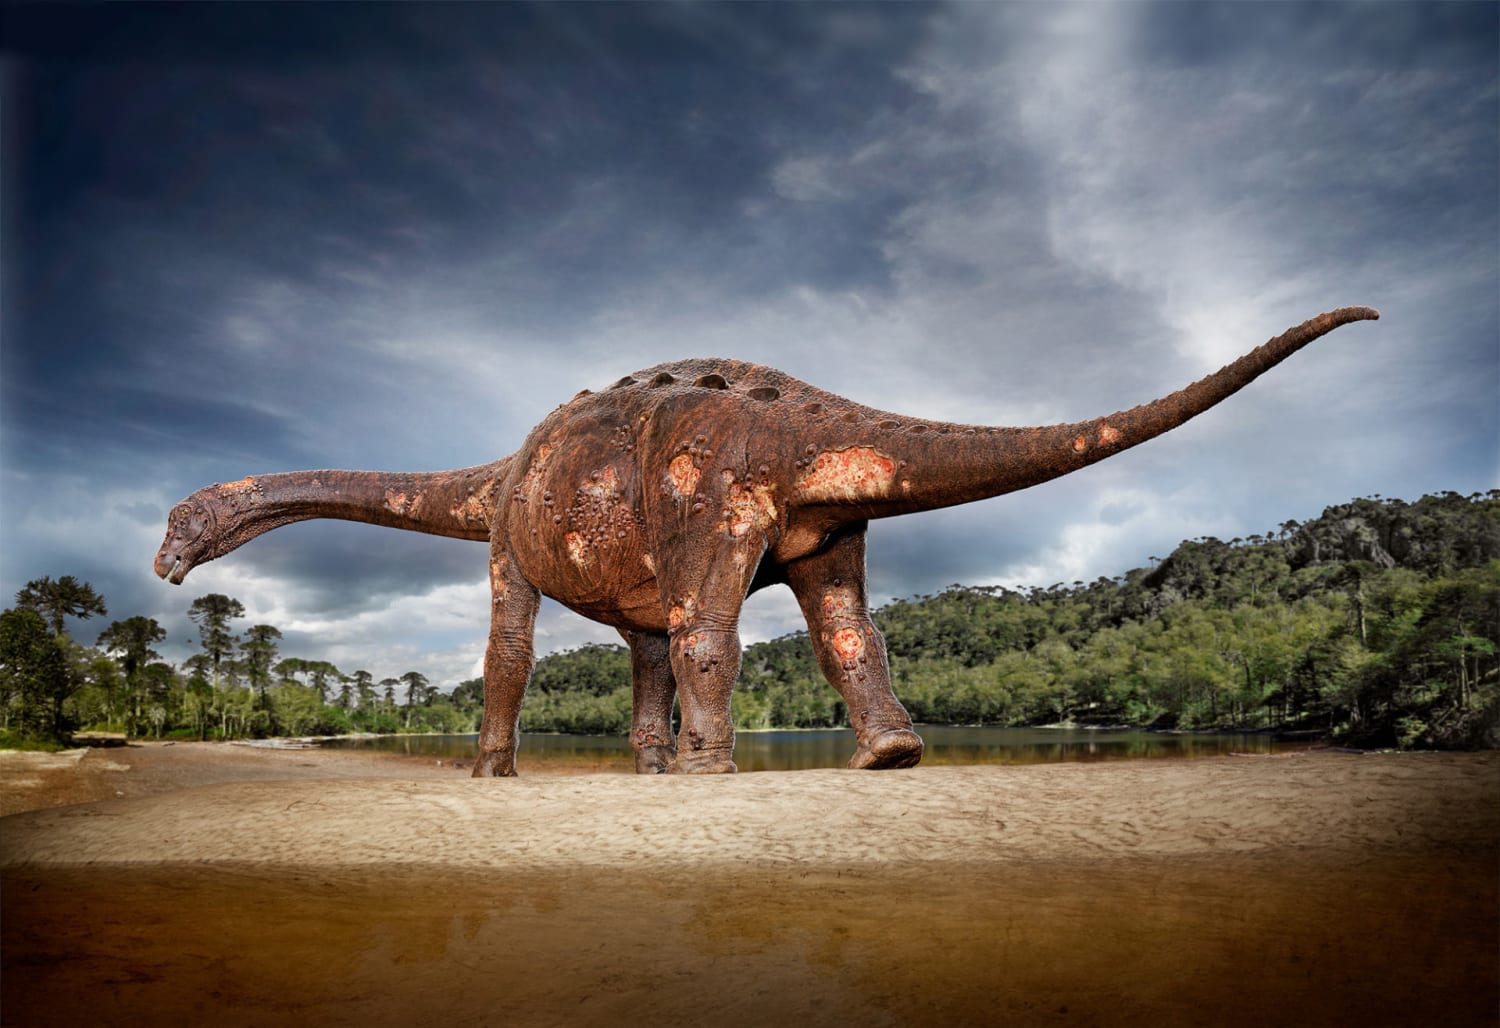 Reconstruction of a Titanosaur identified last November to have had parasites in its bones which would've caused osteomyelitis, an acute bone infection that can also lead to severe ulcerations